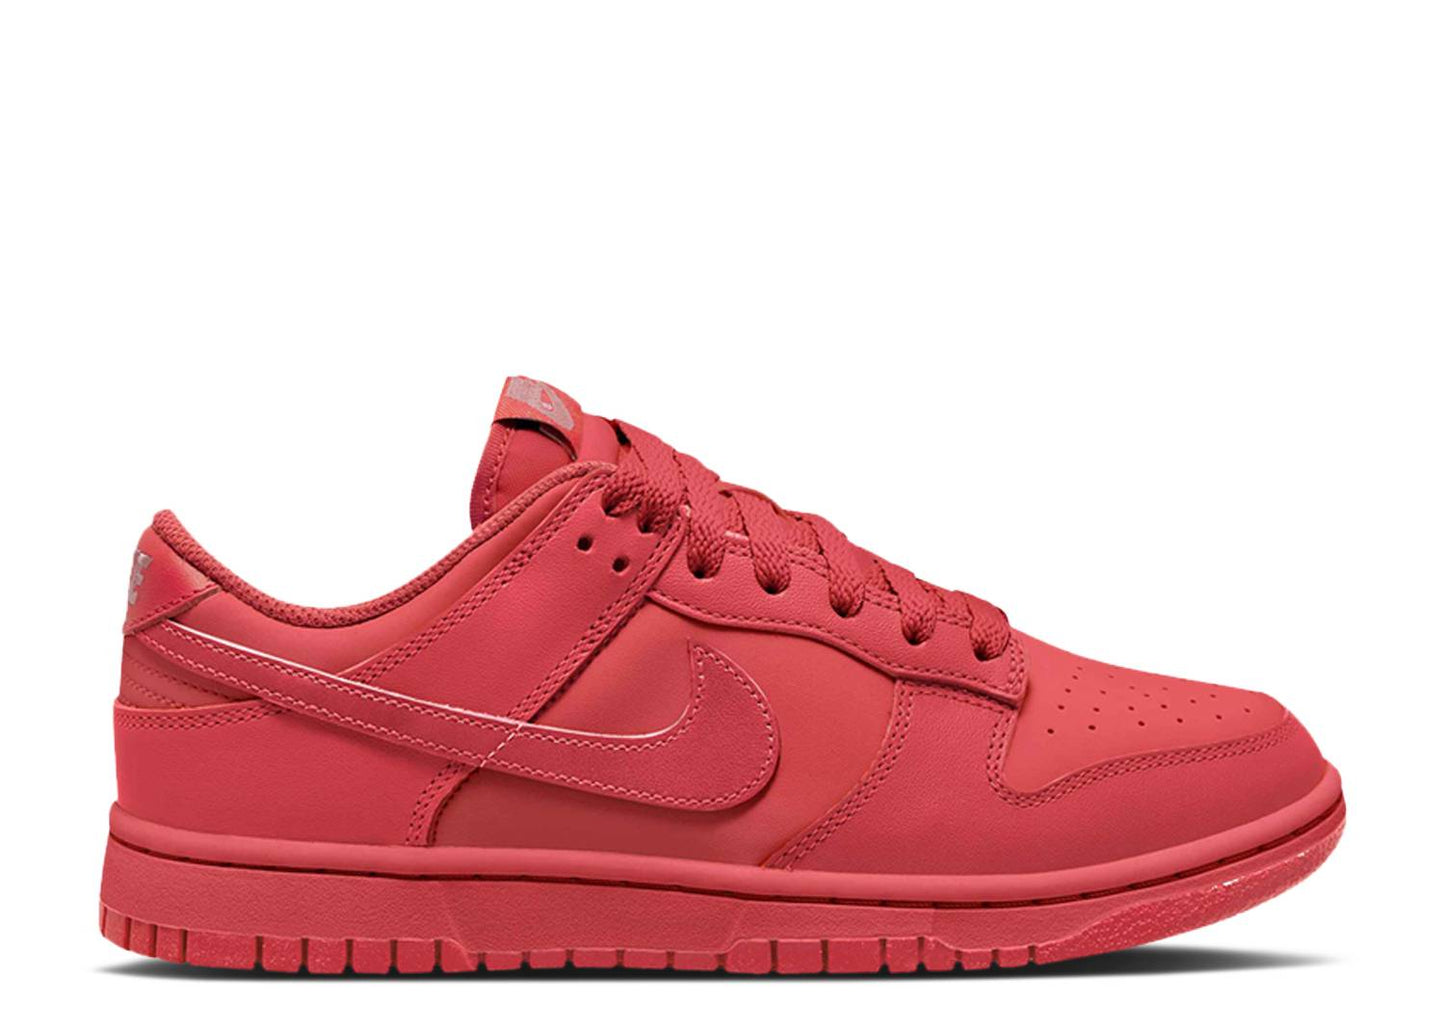 Nike Dunk Low "Track Red" (GS)